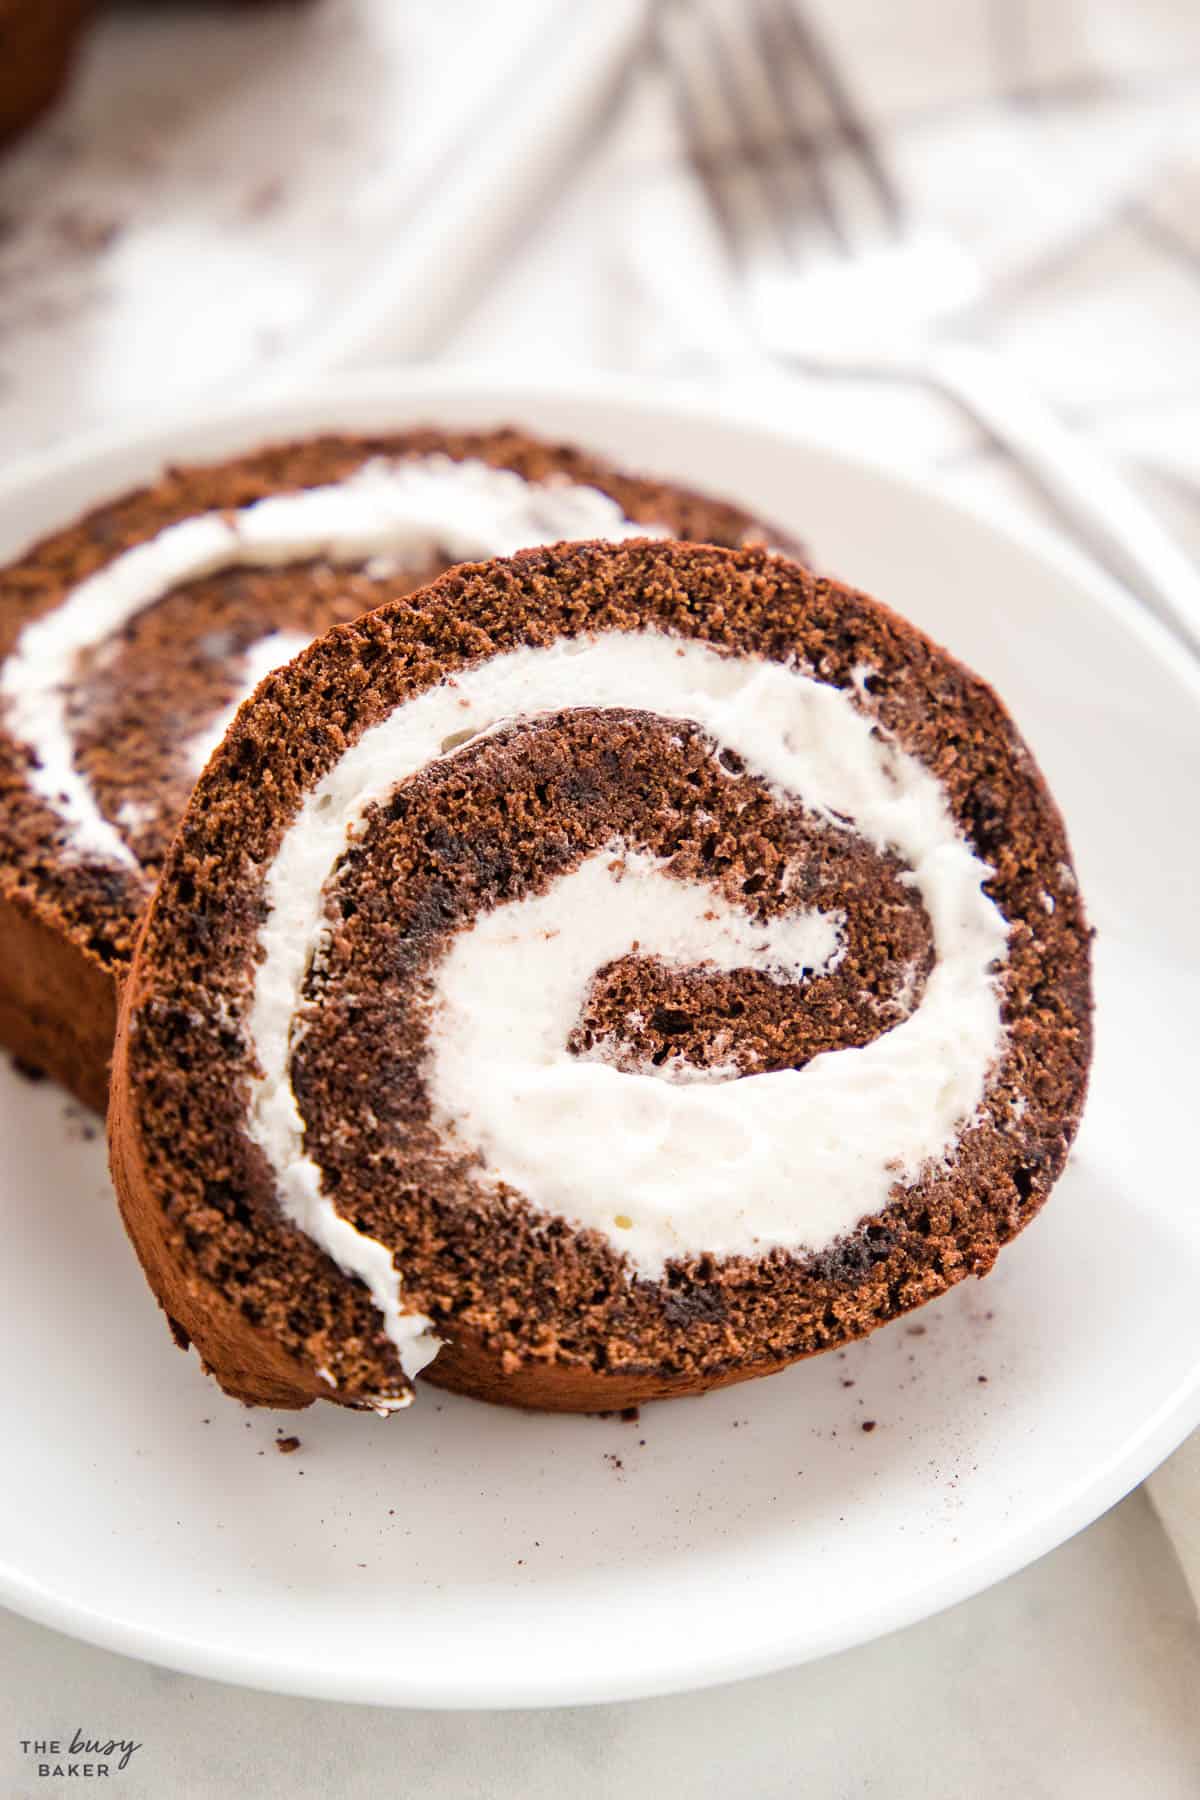 closeup image: slice of chocolate swiss roll with whipped cream